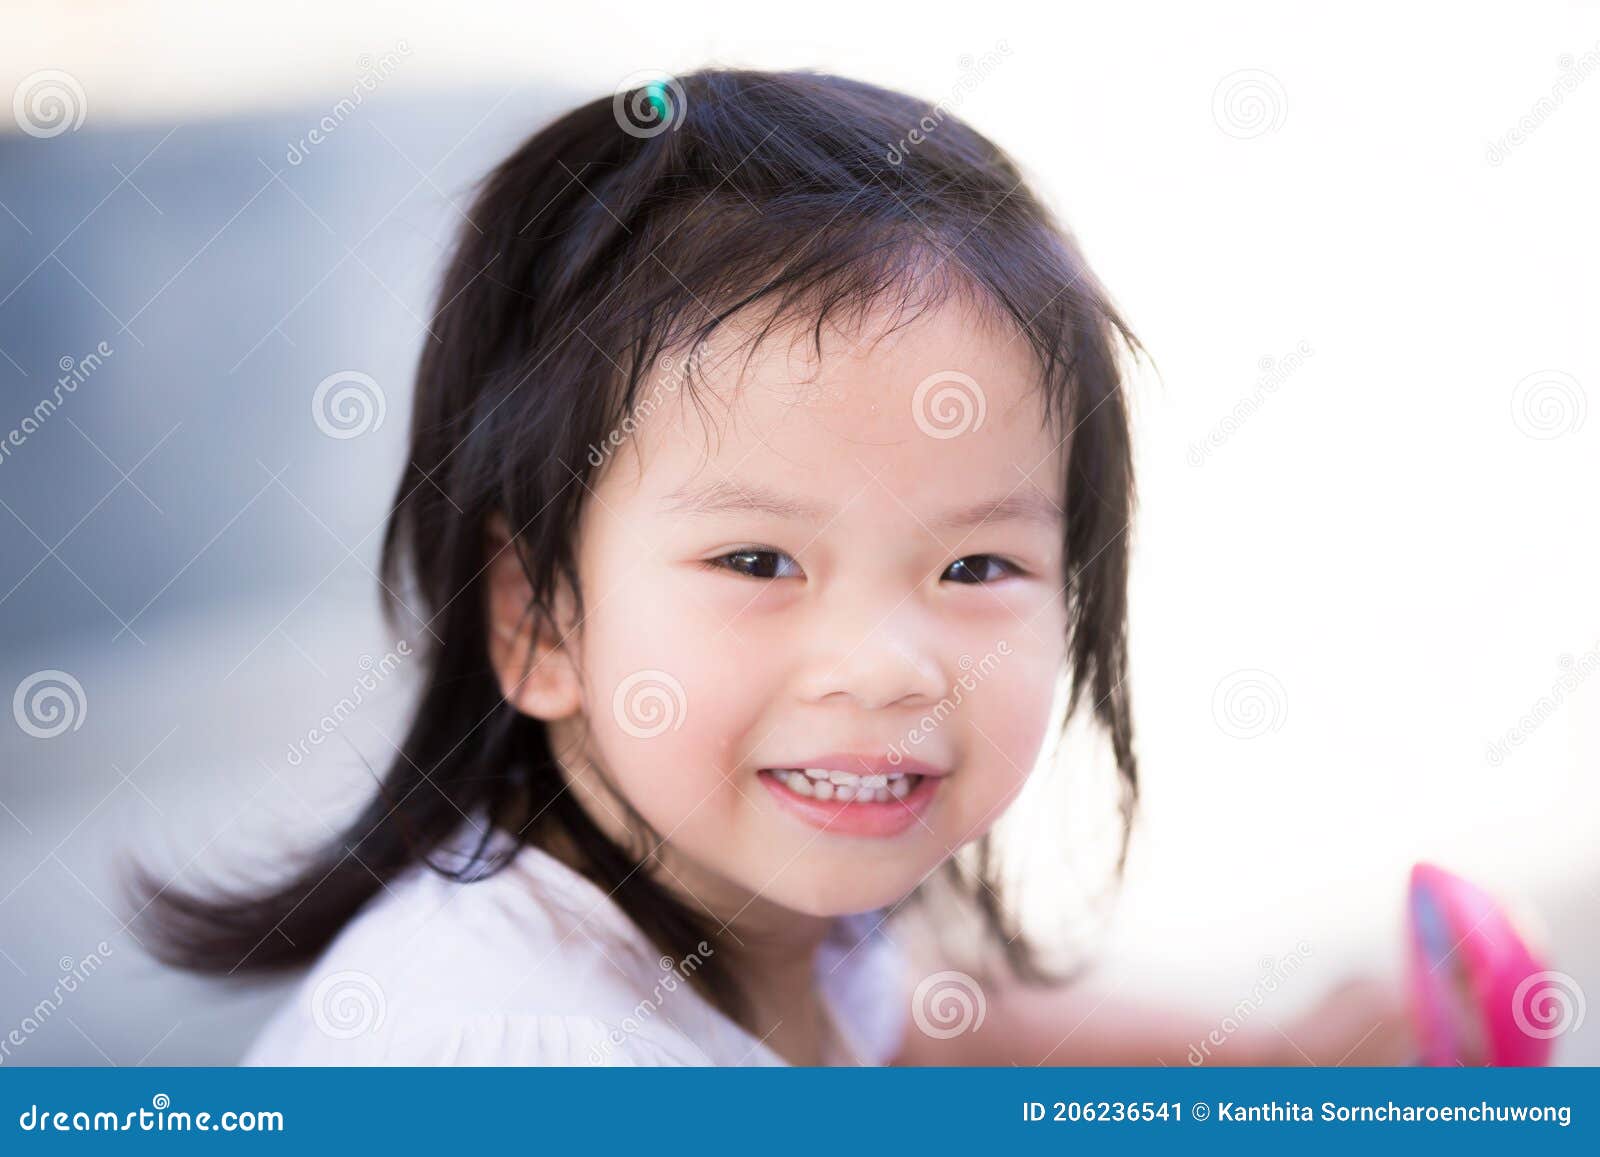 Close Up. Child is Happy Looking at the Camera and Smiles Sweet and ...